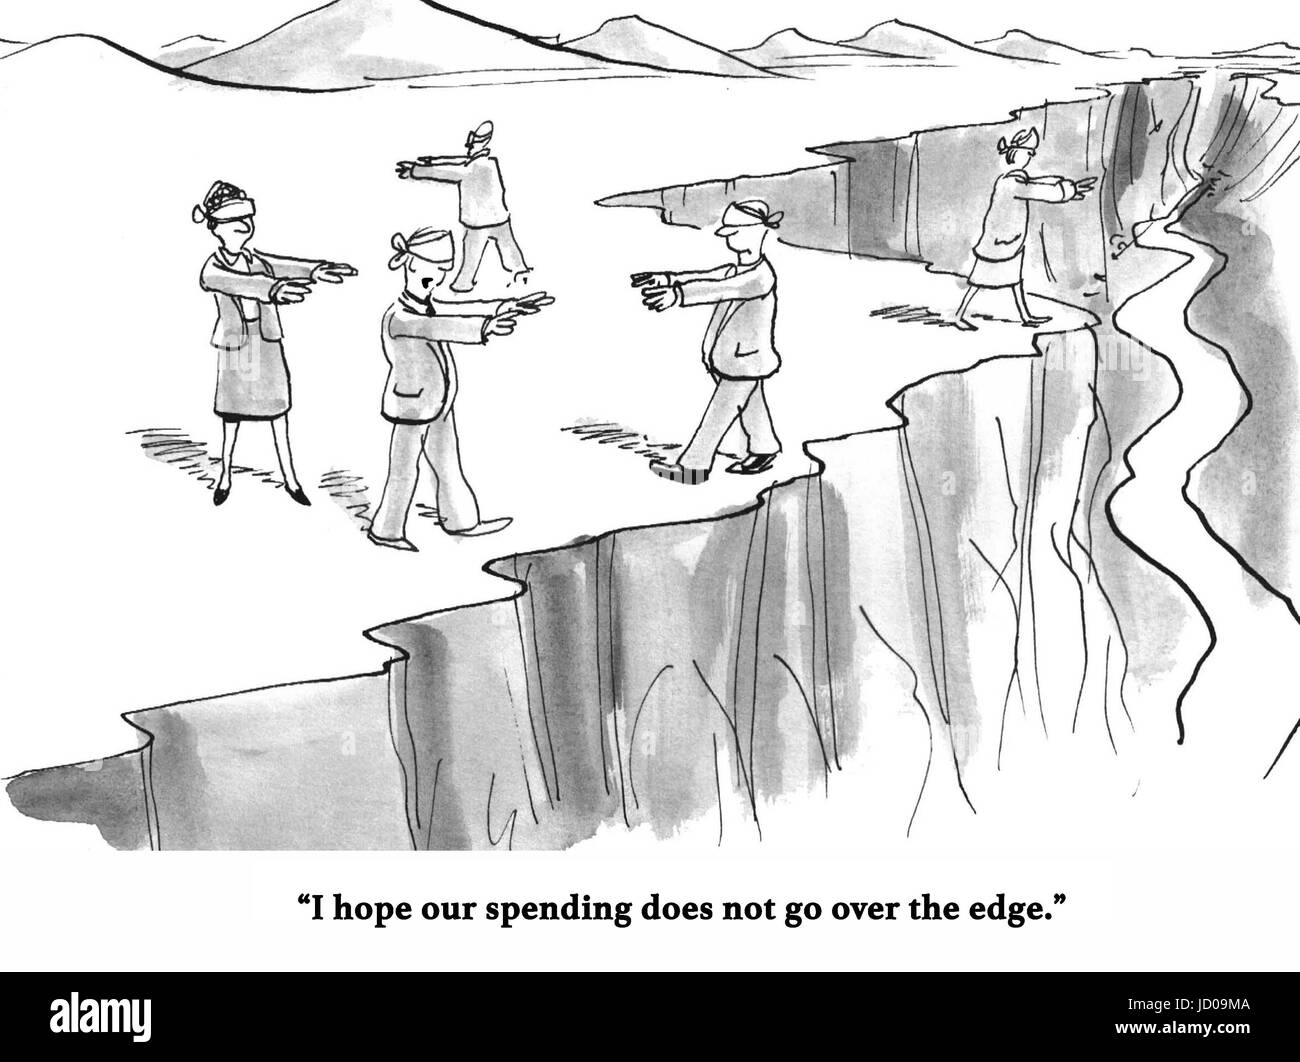 Business cartoon depicting the possibility of overspending the budget. Stock Photo